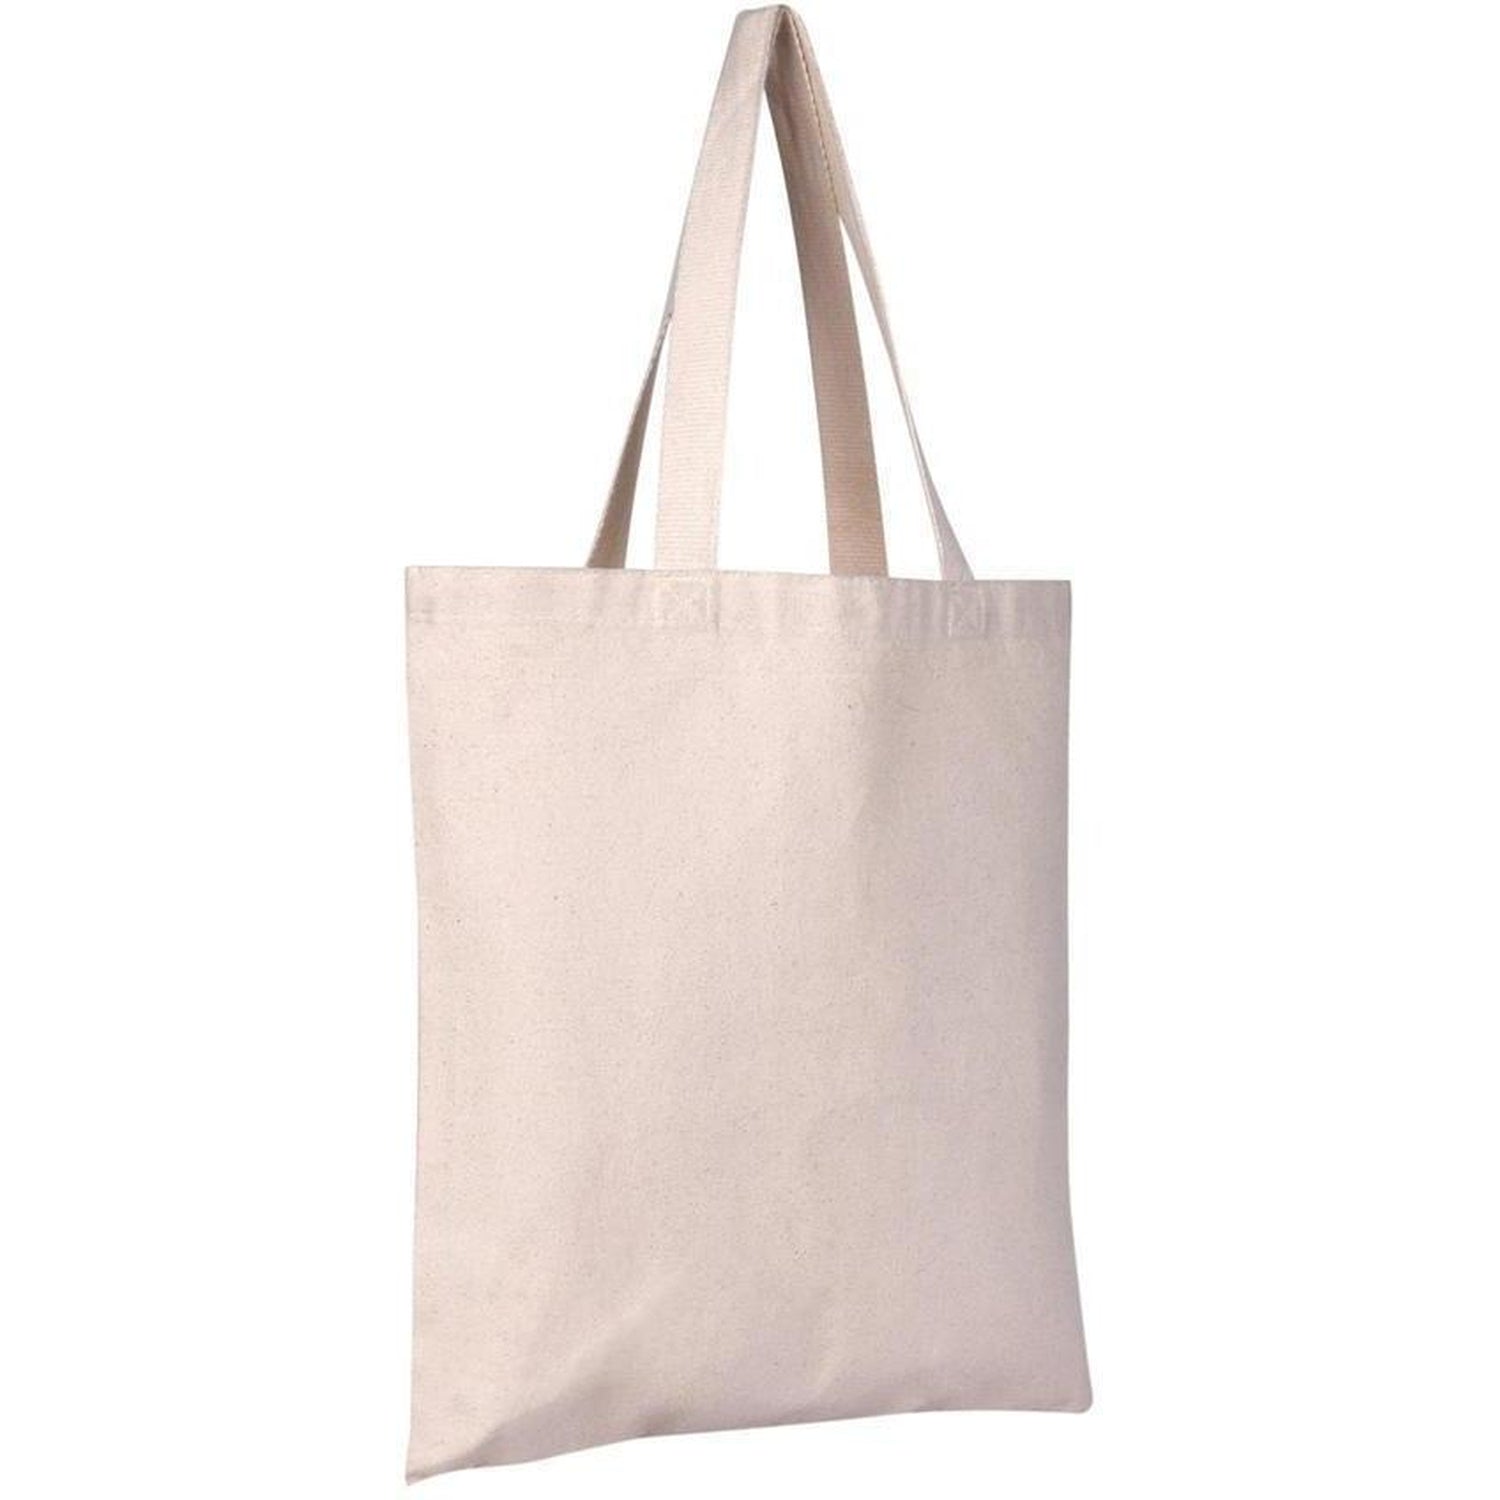 Canvas Tote Bags | Personalized Tote Bags & Tote Bags Wholesale ...